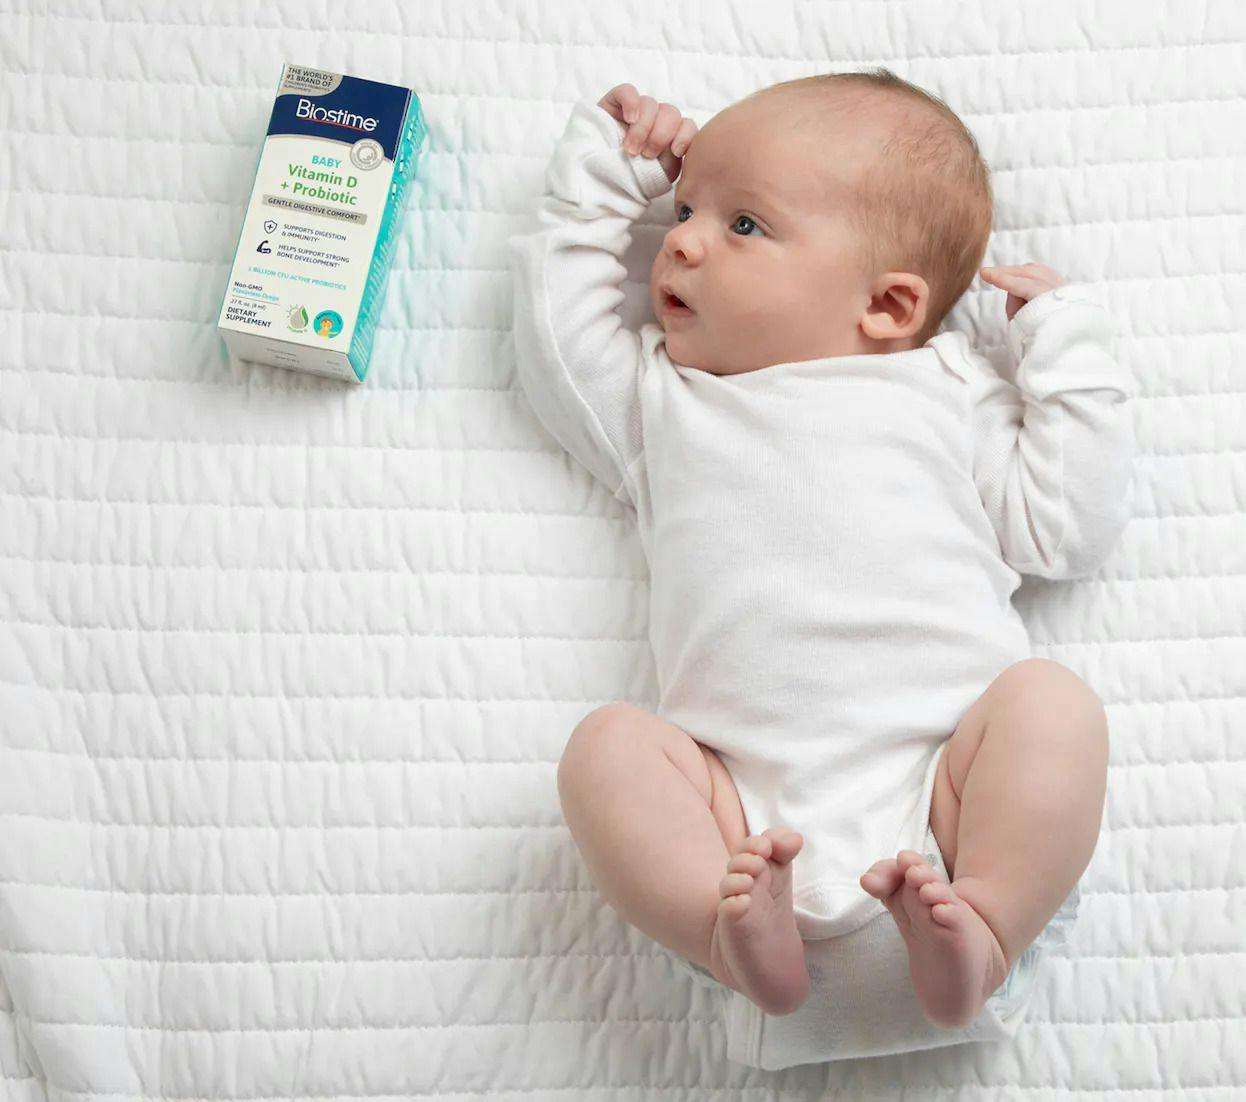 New children’s probiotic supplement from Biostime brand supports infant gut microbiota, includes strains from Kaneka Probiotics and AB-Biotics